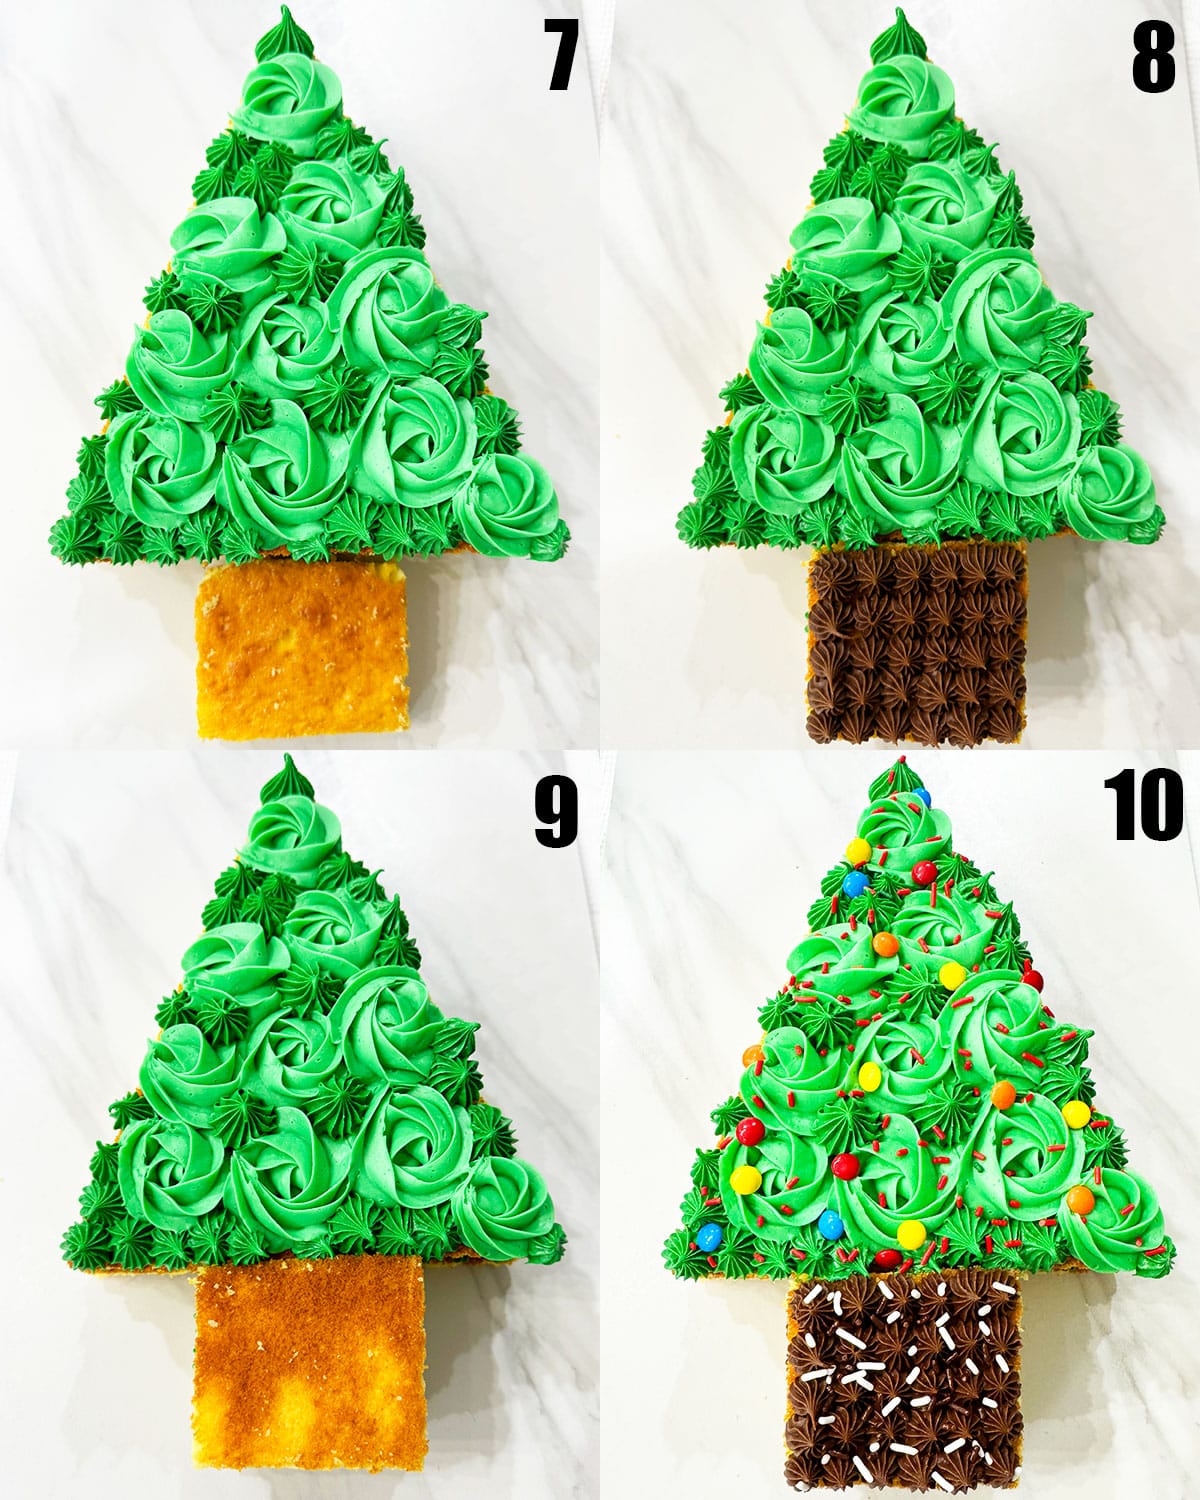 Collage Image With Step by Step Process Shots on How to Decorate Christmas Cake. 